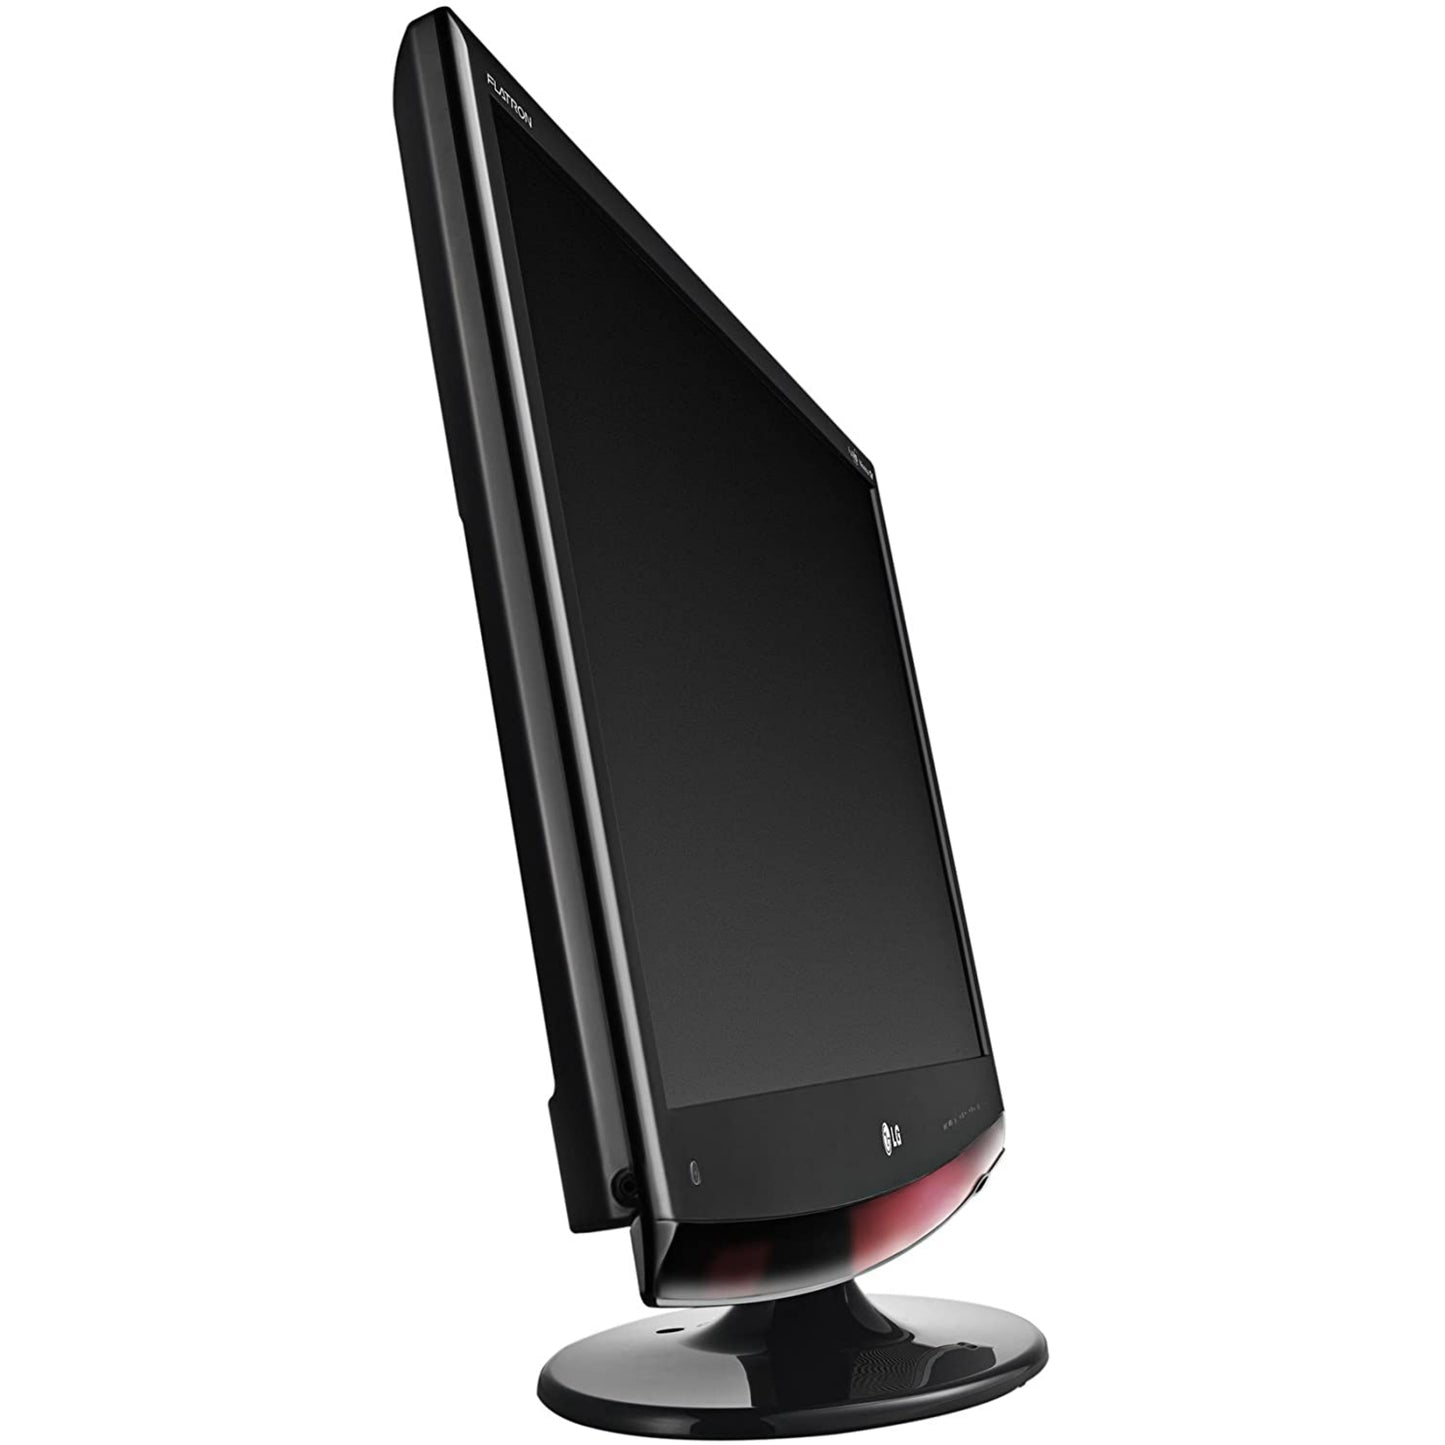 22 inch LG LCD TV with tilting stand